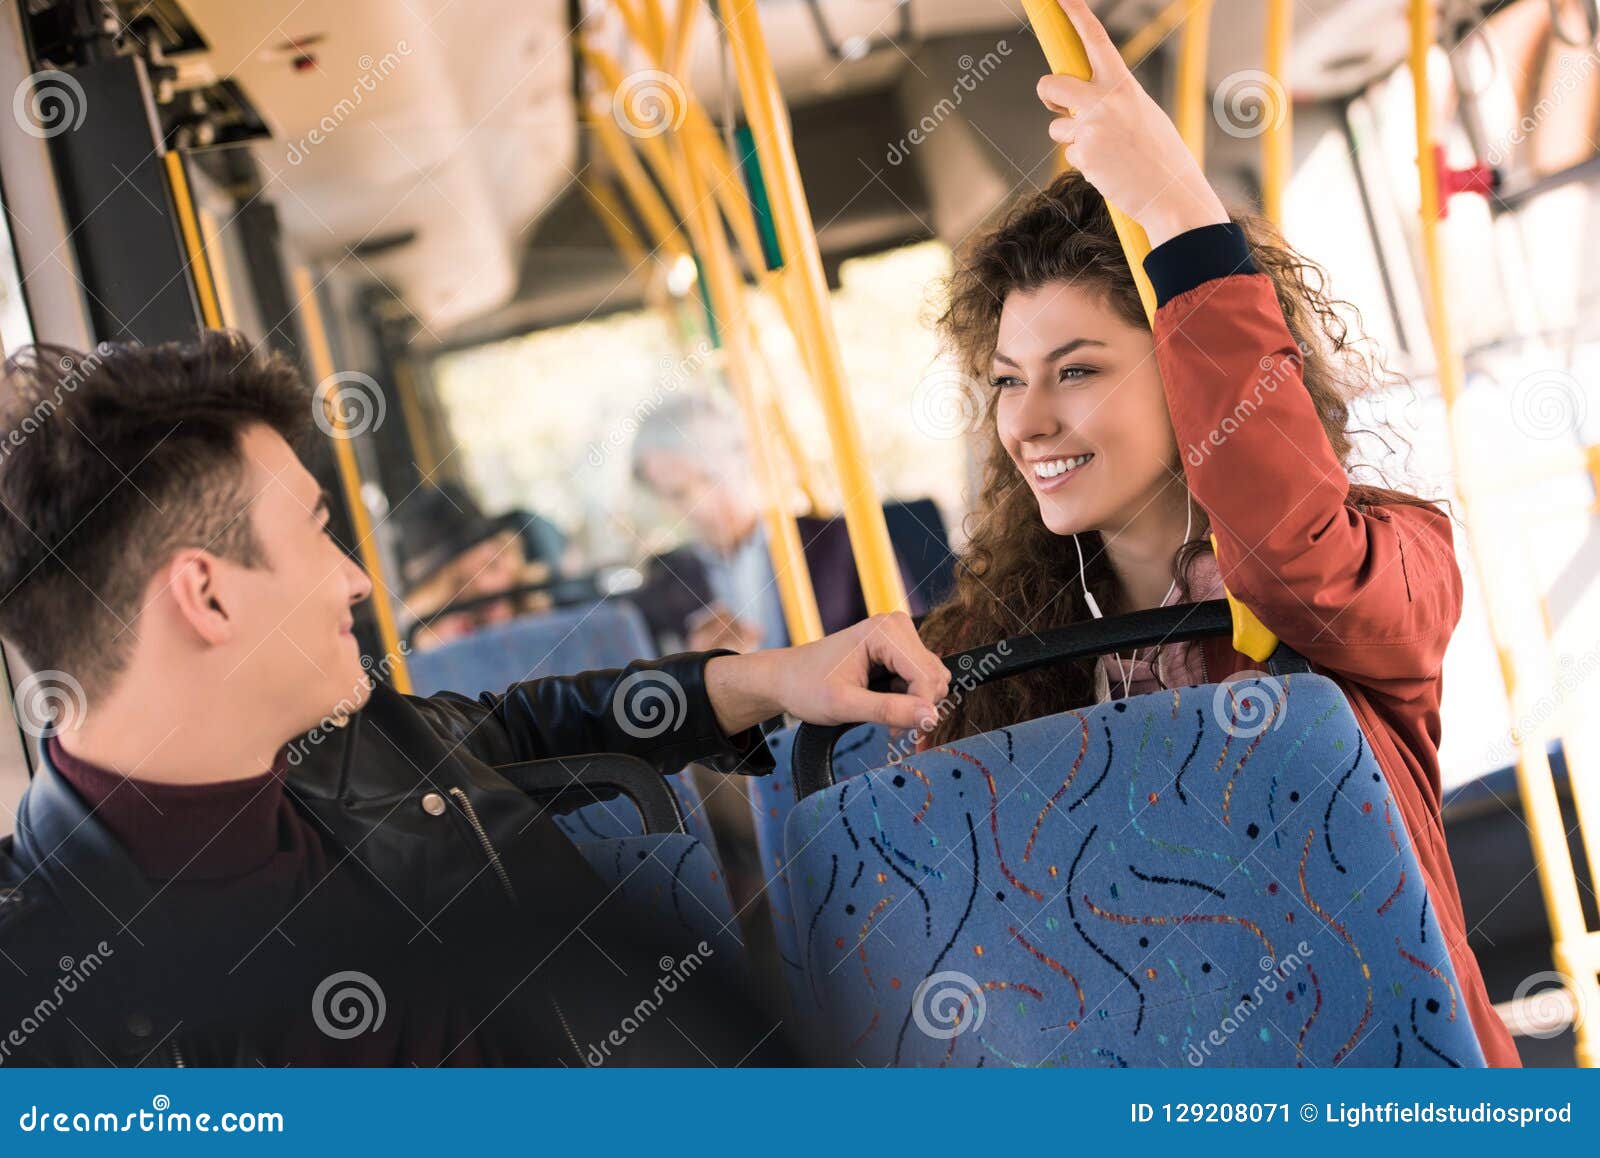 cheerful young man and woman smiling each other